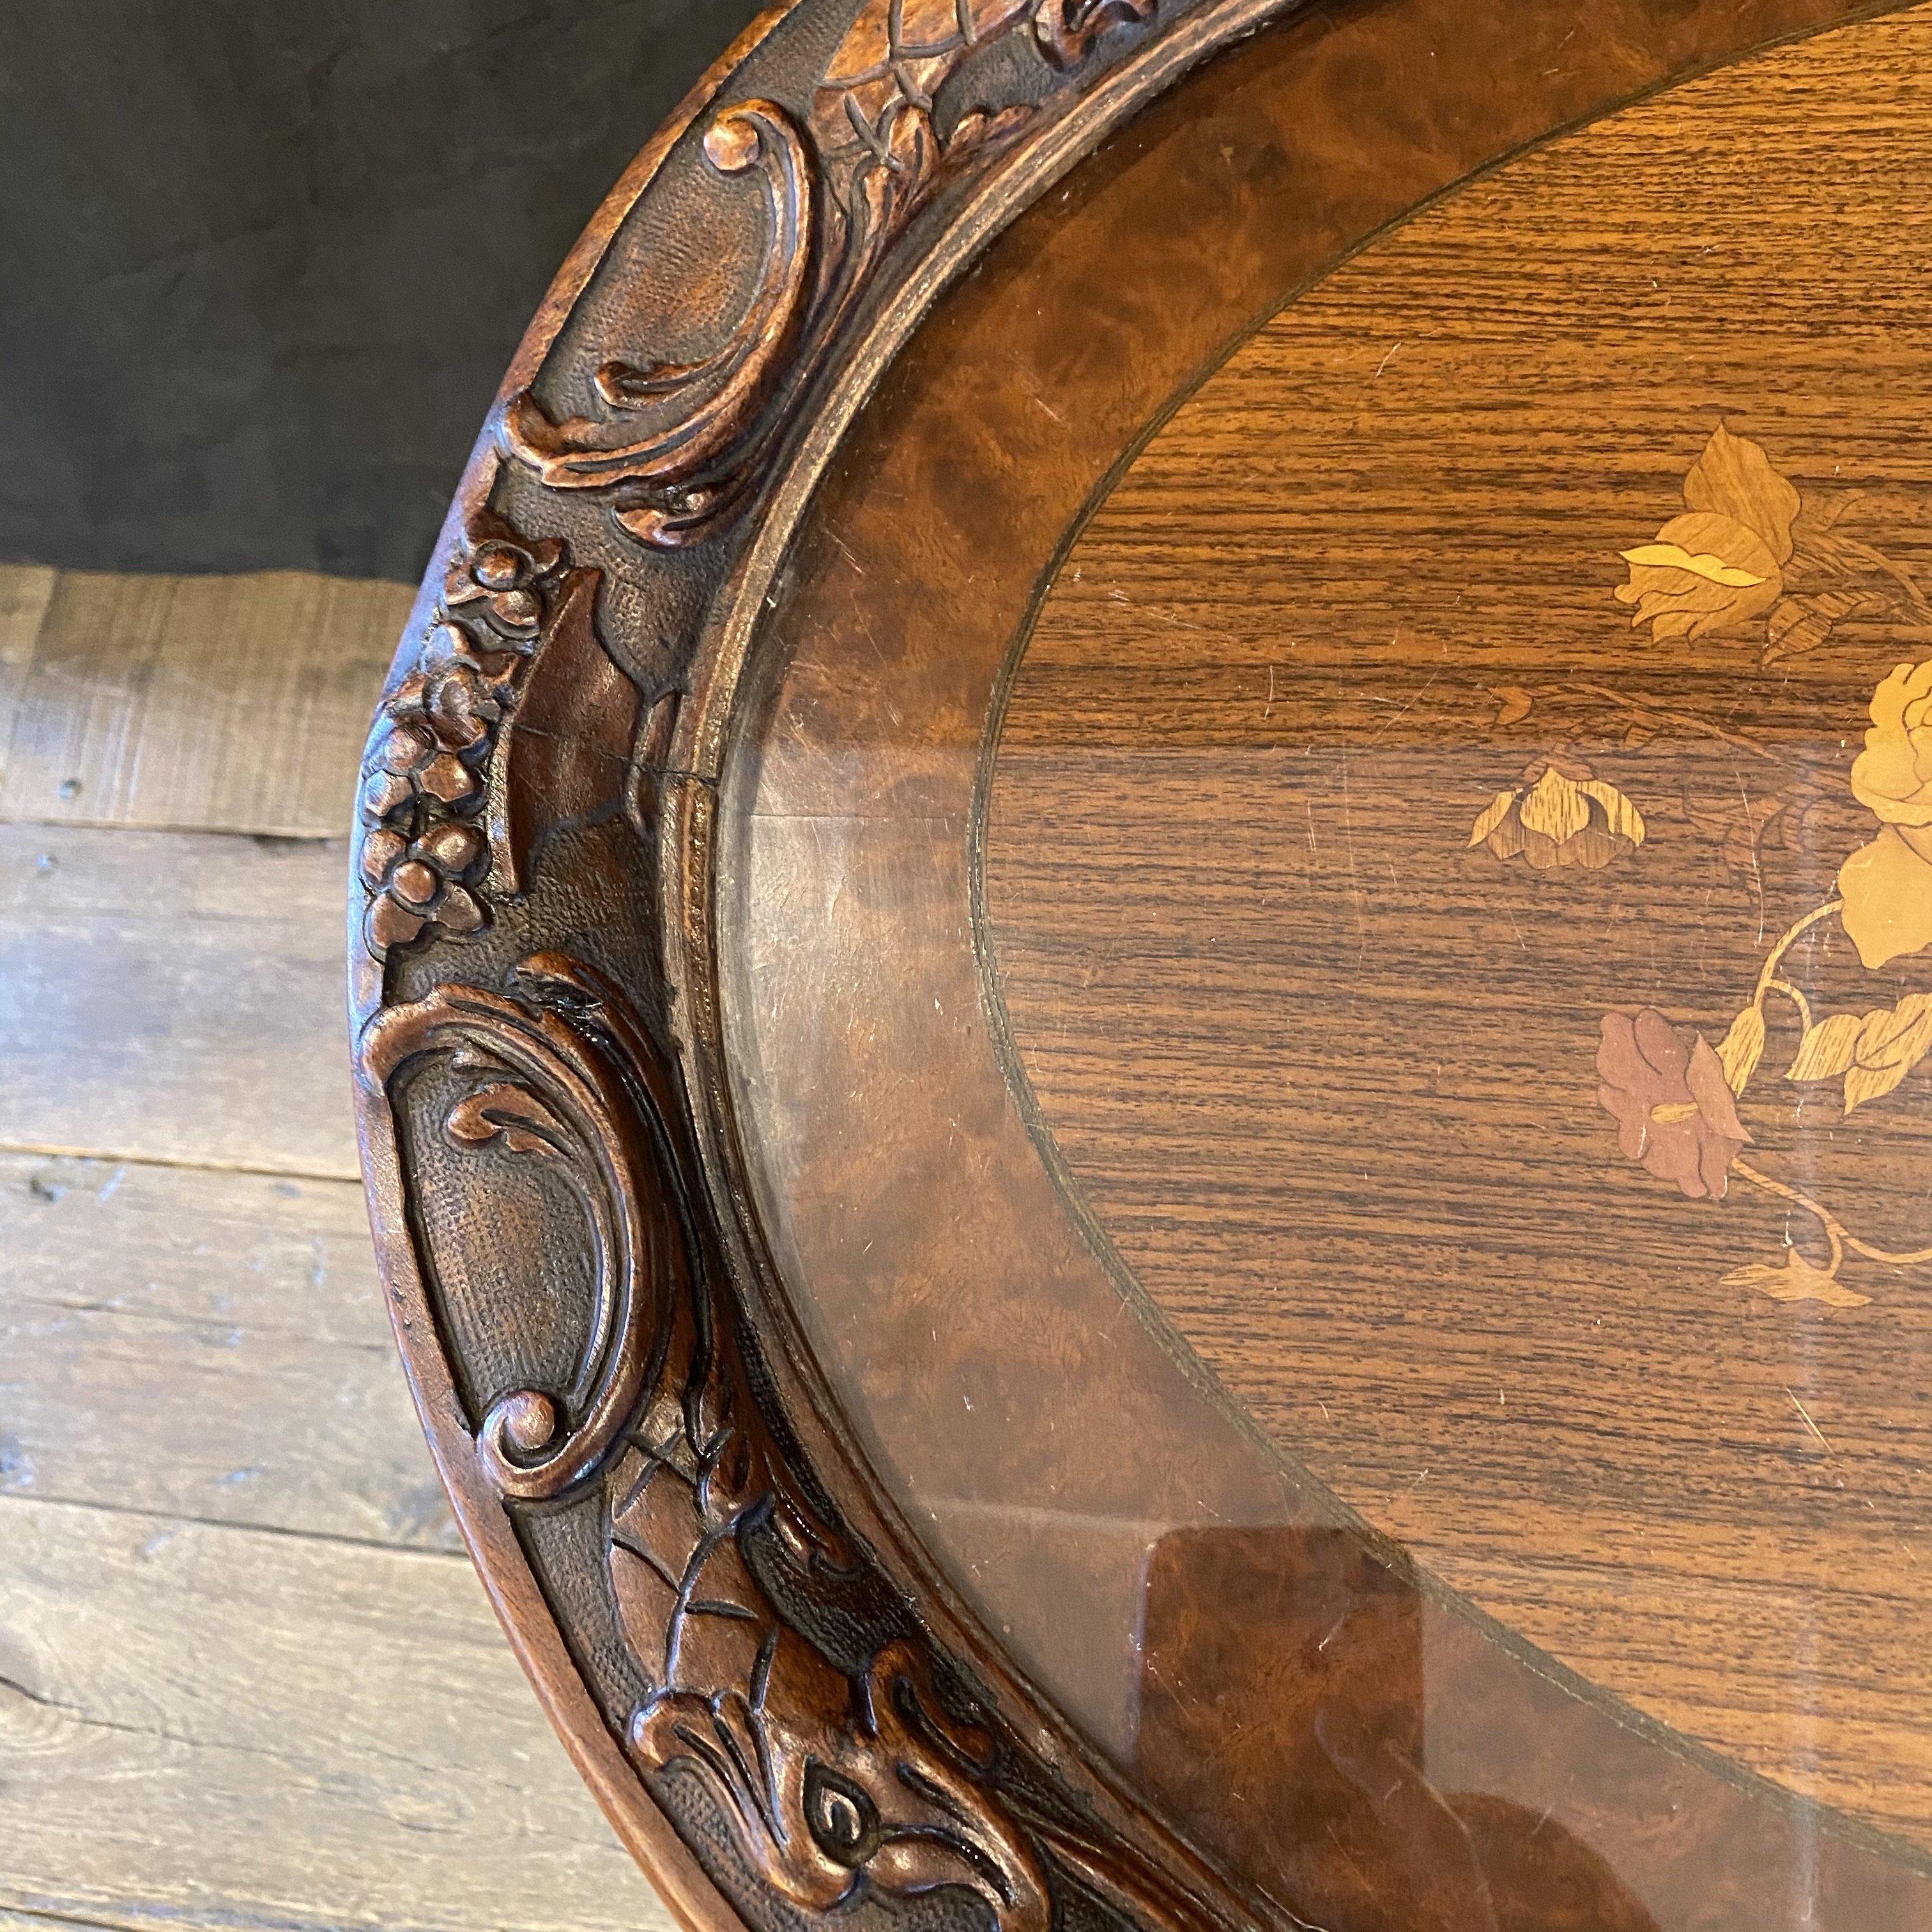 Lovely French Louis XV intricately carved walnut side table or petite oval coffee table having gorgous inlay floral marquetry decoration. Base has marvelous carving and central finial accenting the stretcher underneath. Versatile in its design; can